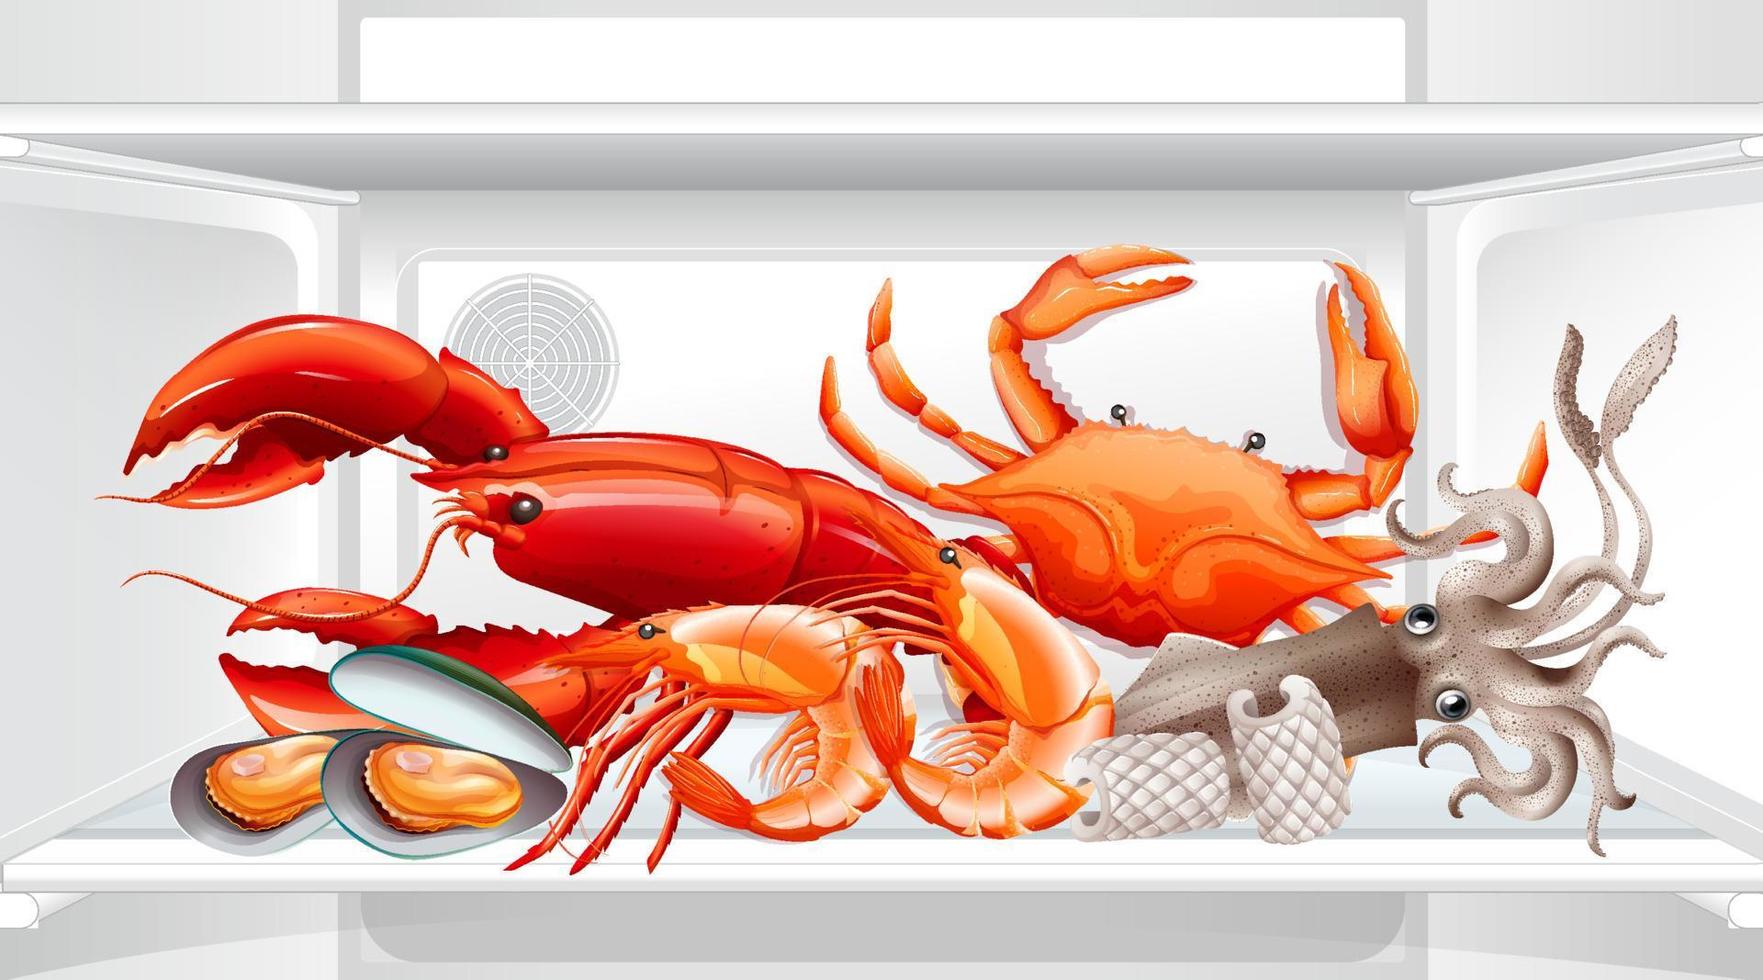 An inside the refrigerator with sea food vector